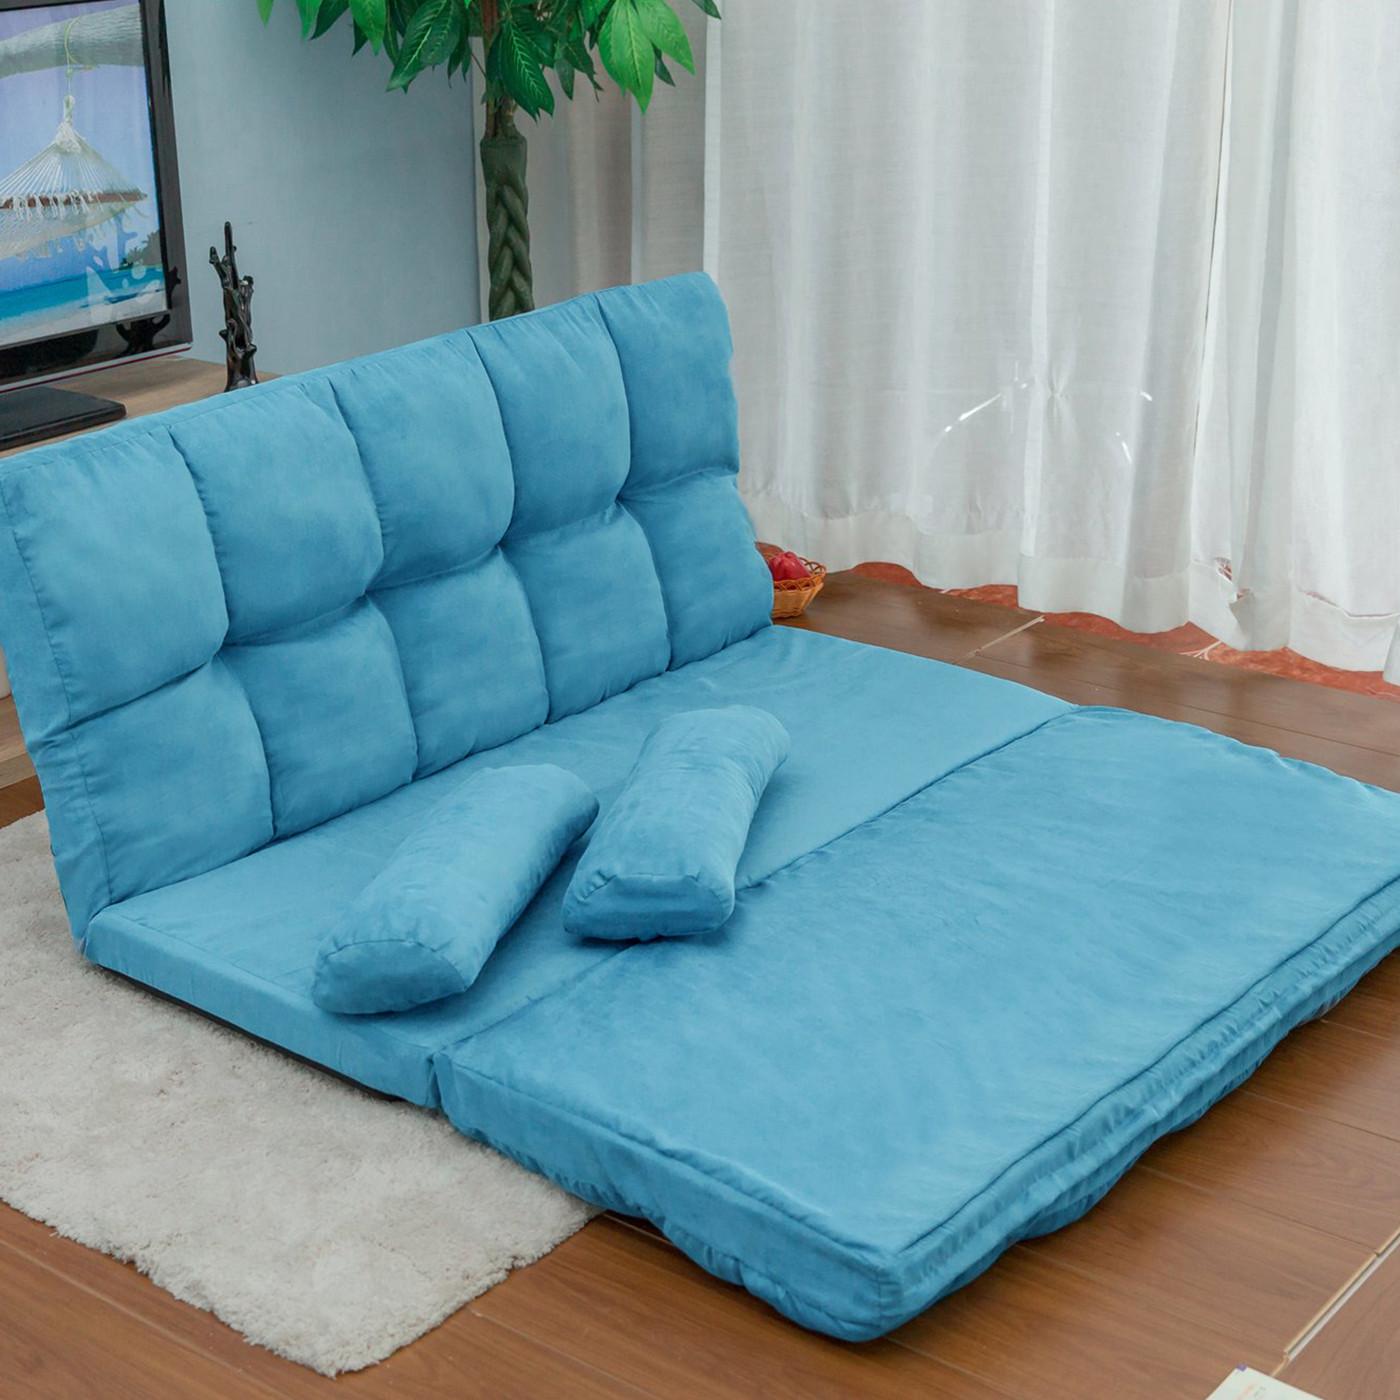 Fold Down Sofa Bed Lazy Sofa Floor Couch Adjustable Folding Modern Futon Chaise Video Gaming Lounge Convertible Upholstered Memory Foam Padded Cushion Guest Sleeper Chair with Two Pillows, Blue - image 2 of 7